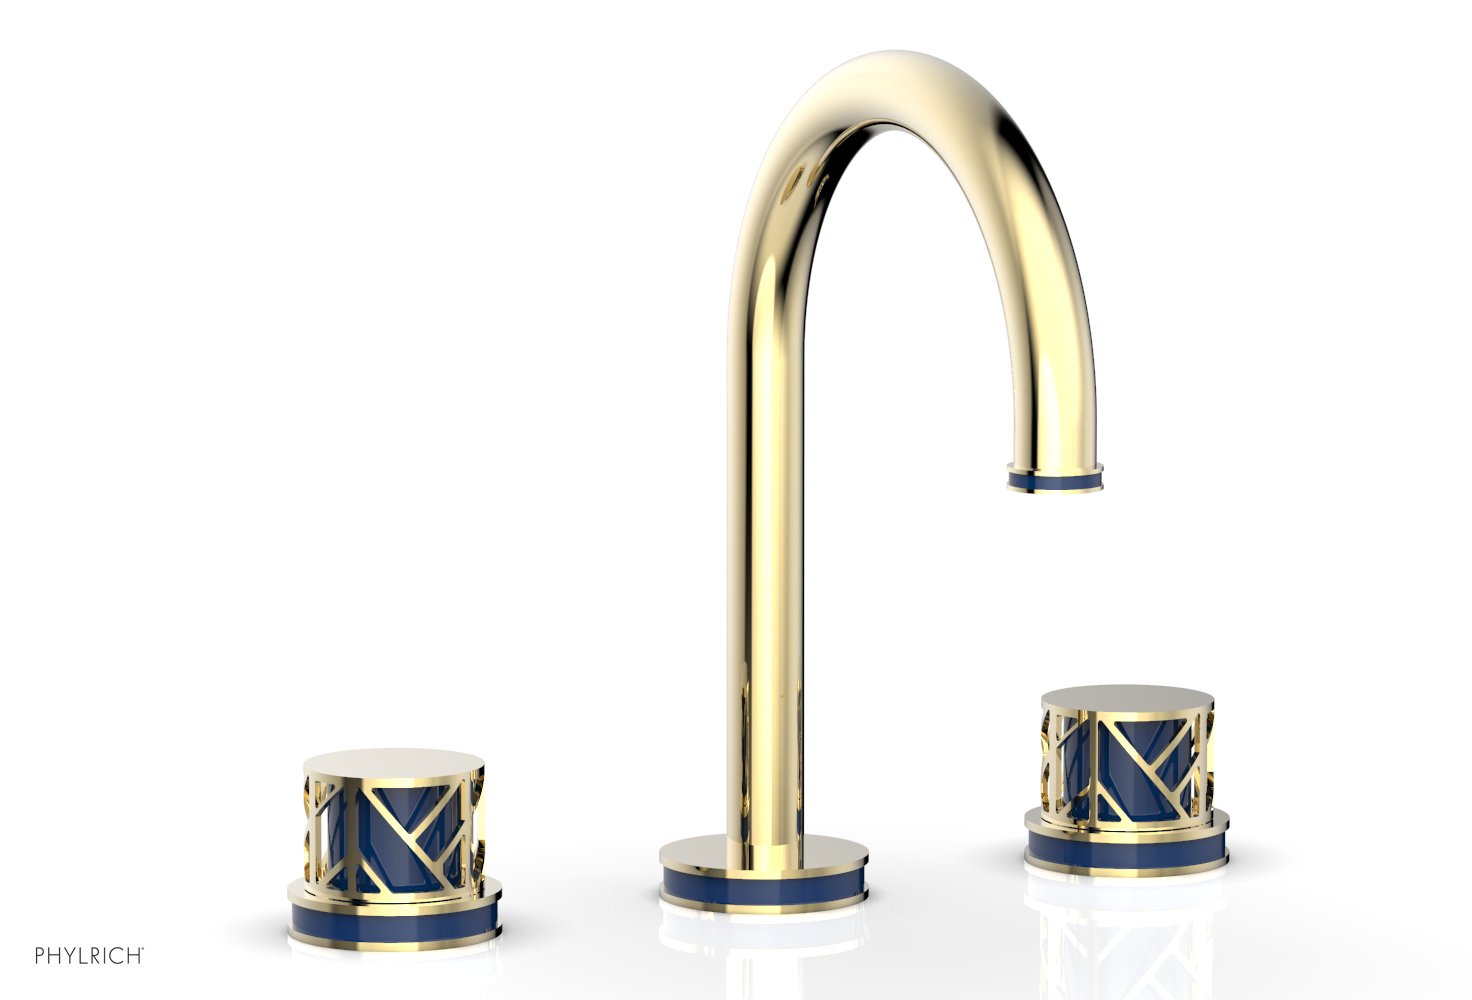 Phylrich JOLIE Widespread Faucet - Round Handles with "Navy Blue" Accents